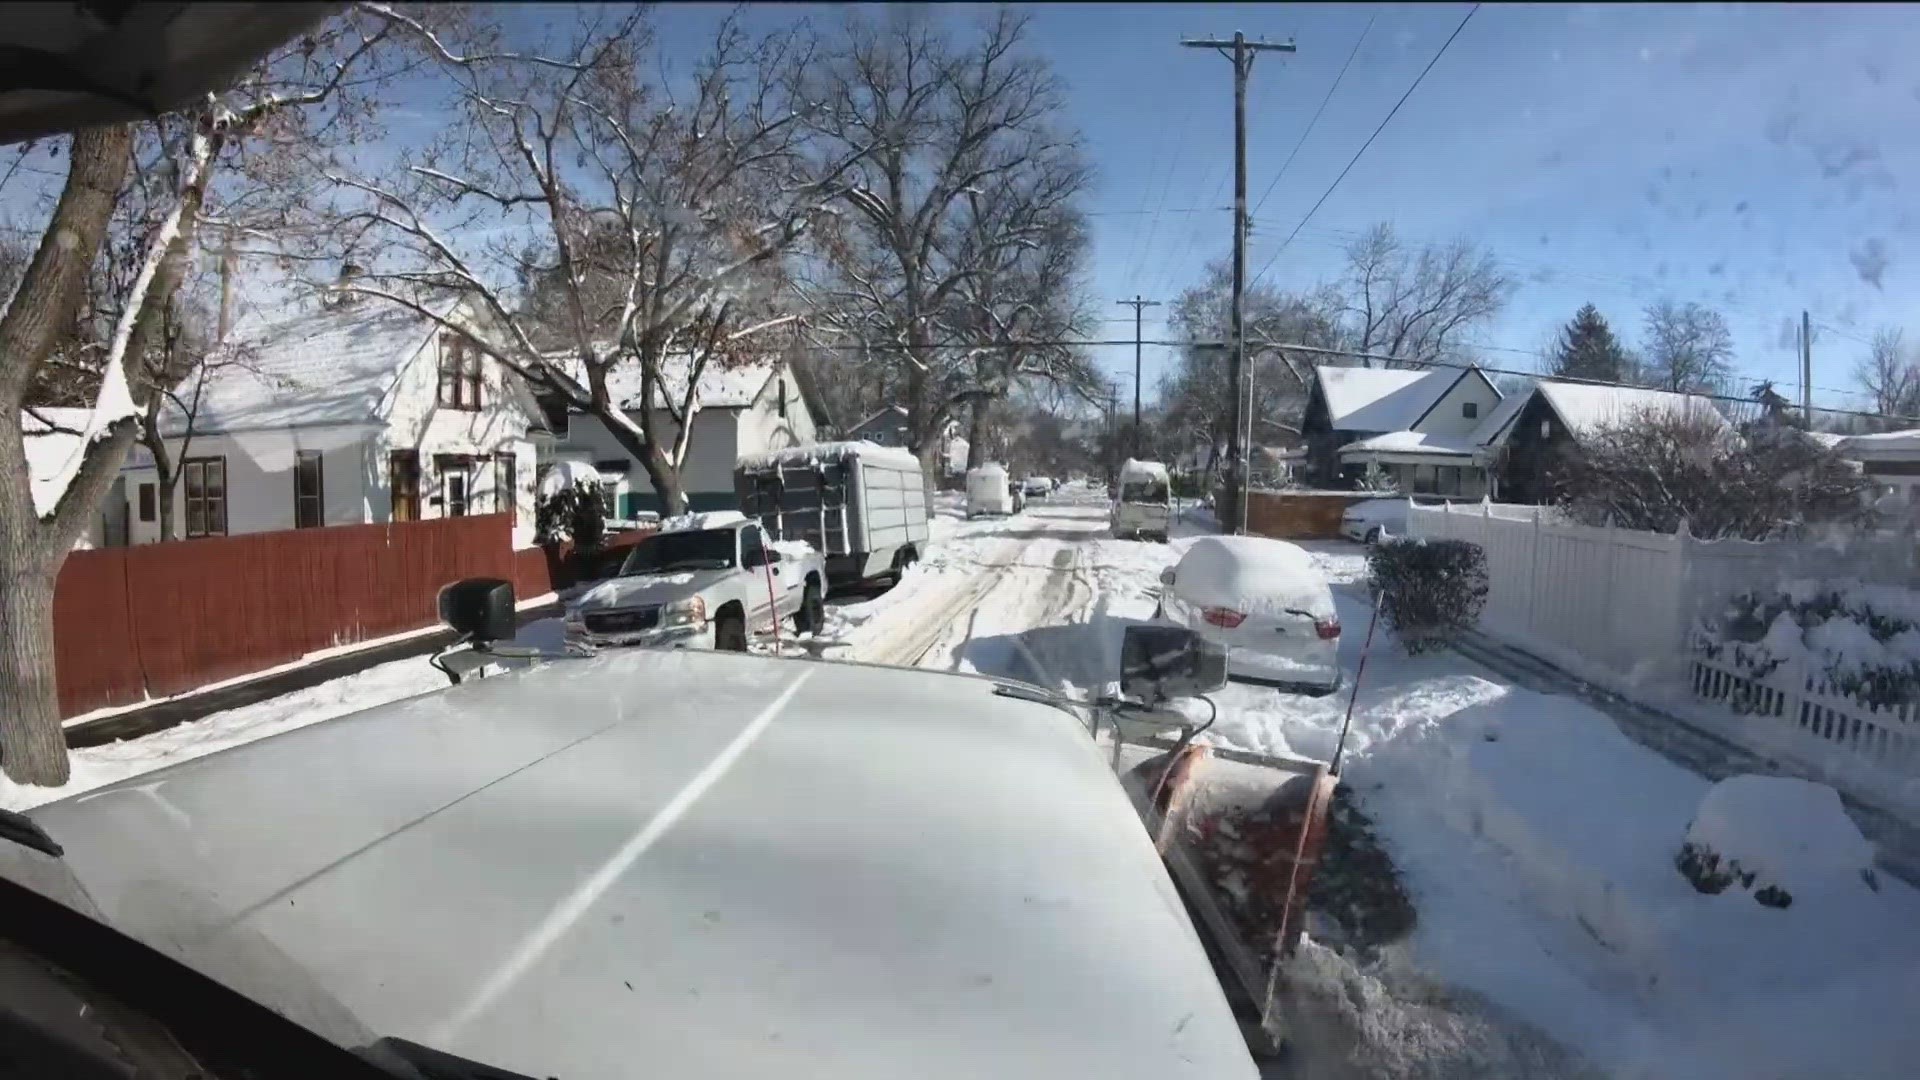 With the amount of snow, the Treasure Valley has seen in the last few days. The Ada County Highway District has moved to plowing residential roads.